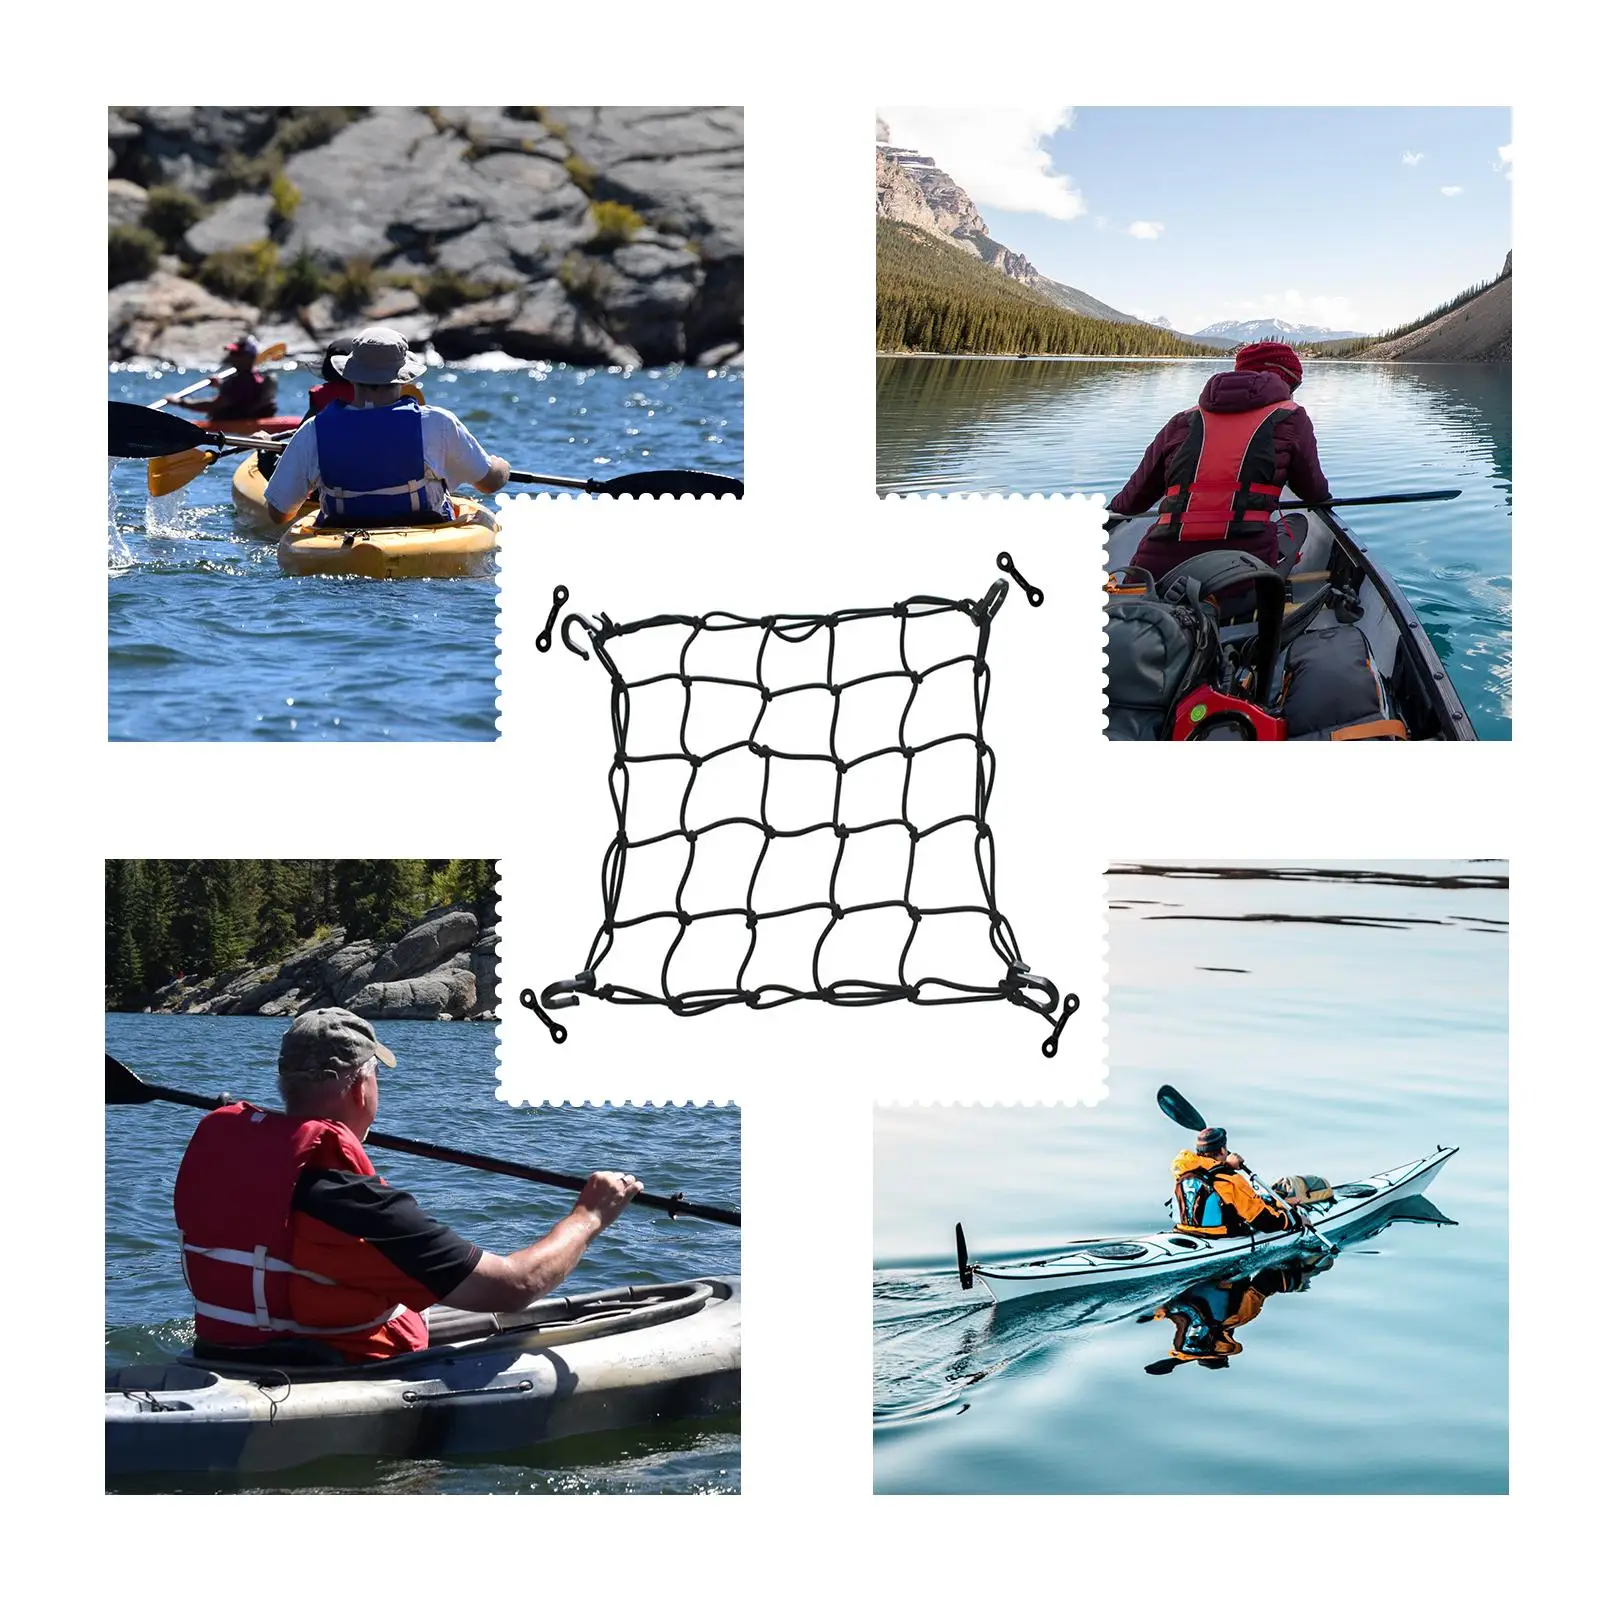 38x38cm Deck Cargo Net Accessories with Pad Eyes Heavy Duty Organizer Bungee Net Nylon for Kayak Marine Canoe Rigging Truck Bed